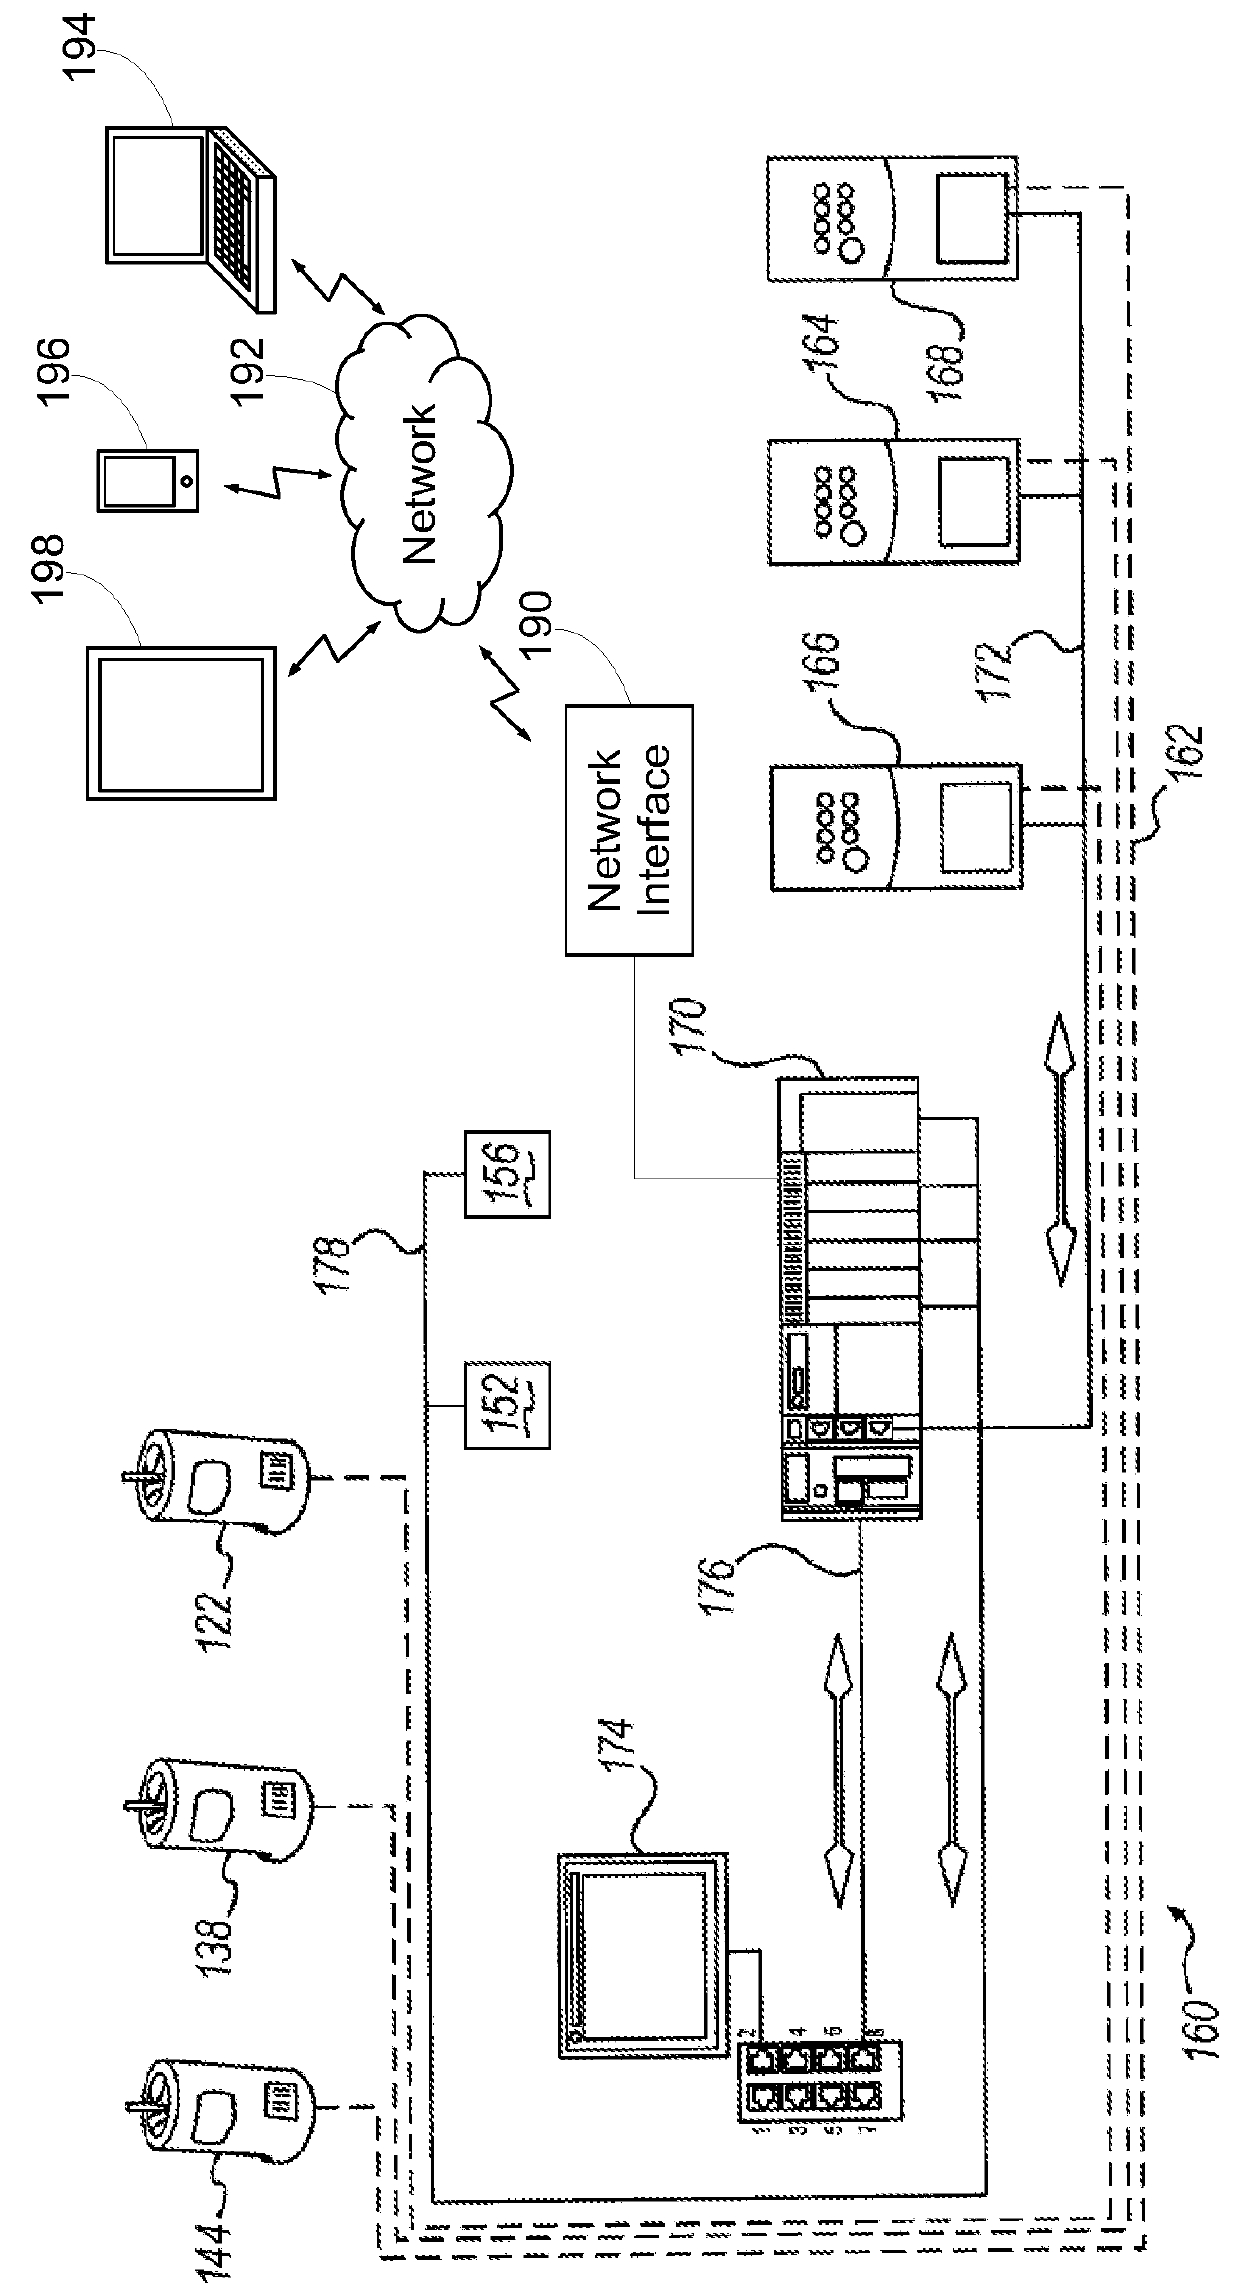 Stretch Wrapping Machine with Automated Determination of Load Stability by Subjecting a Load to a Disturbance